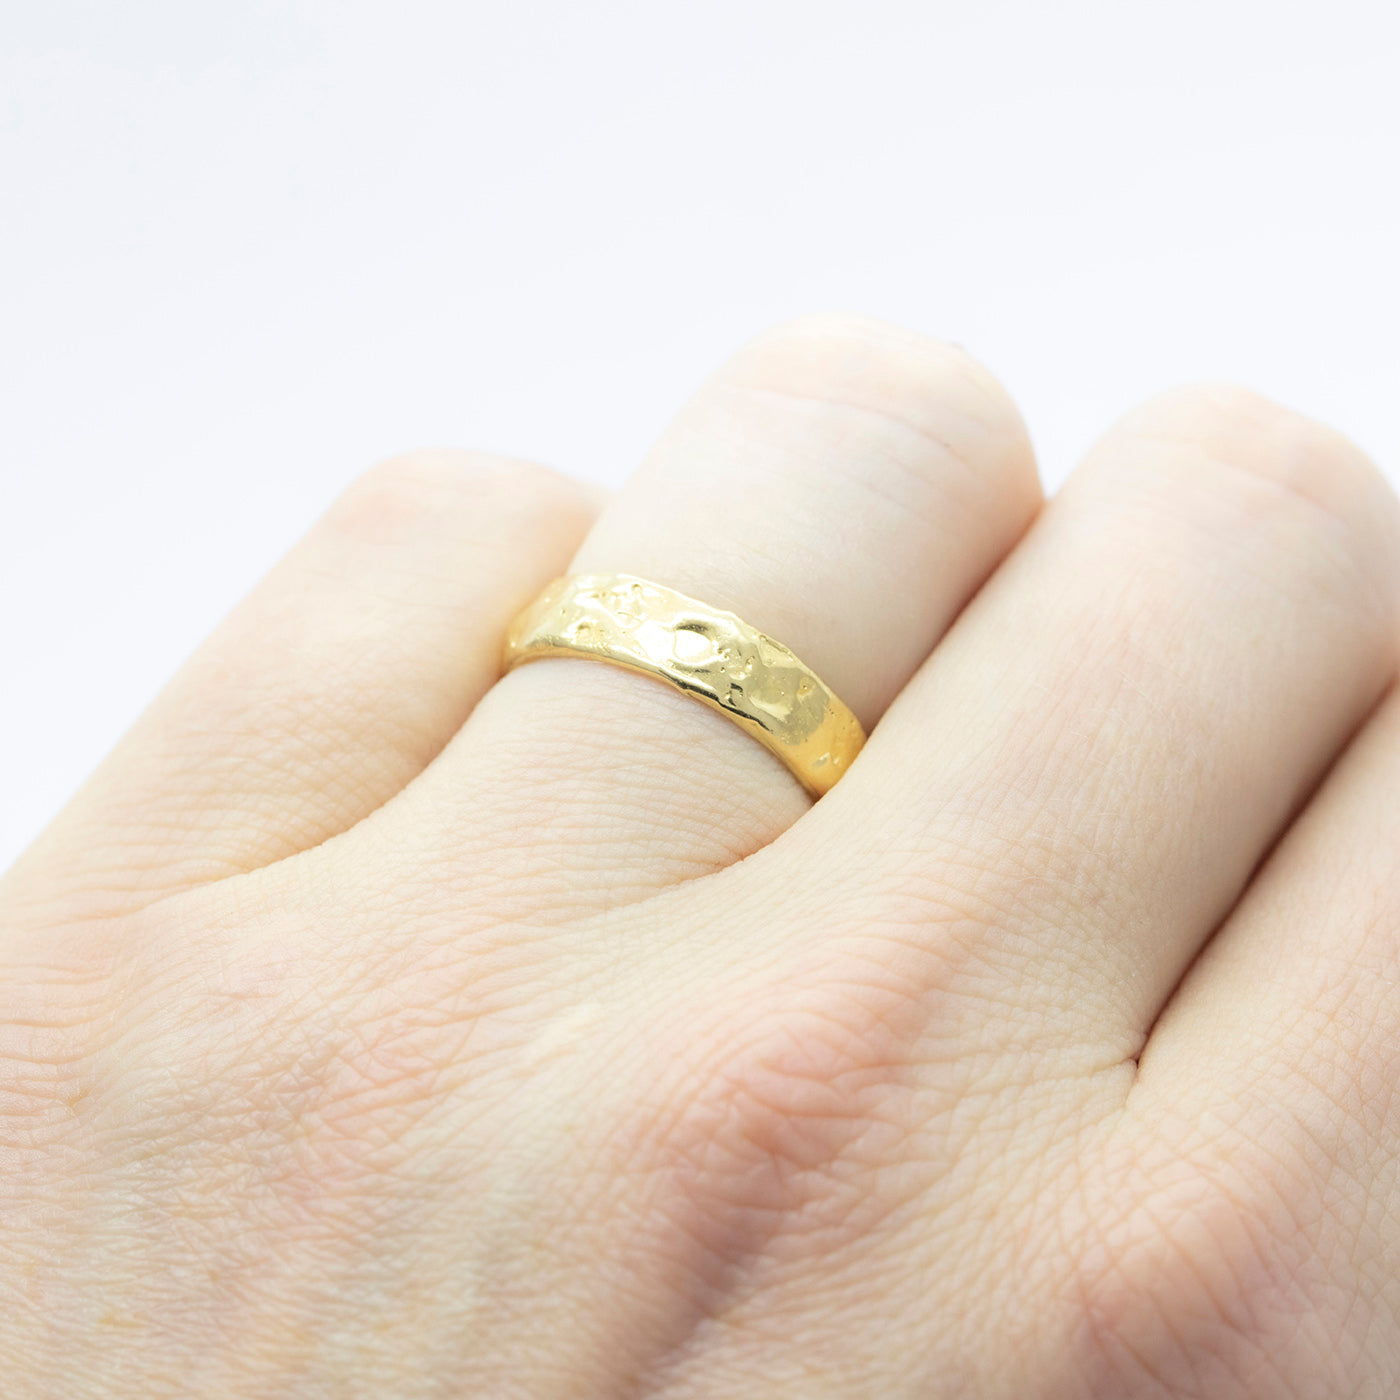 Ring Aine Wedding Band for Him 14ct or 18ct yellow gold product view innan jewellery independent atelier berlin